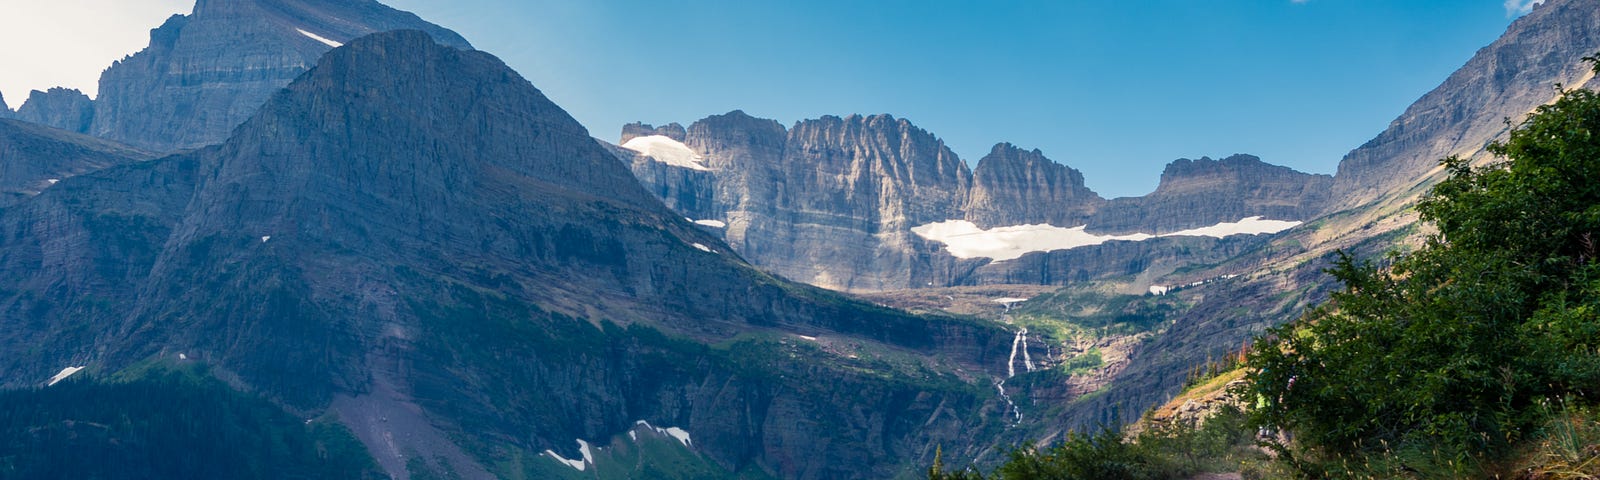 Photo of mountain in Glacier National Park, MT.